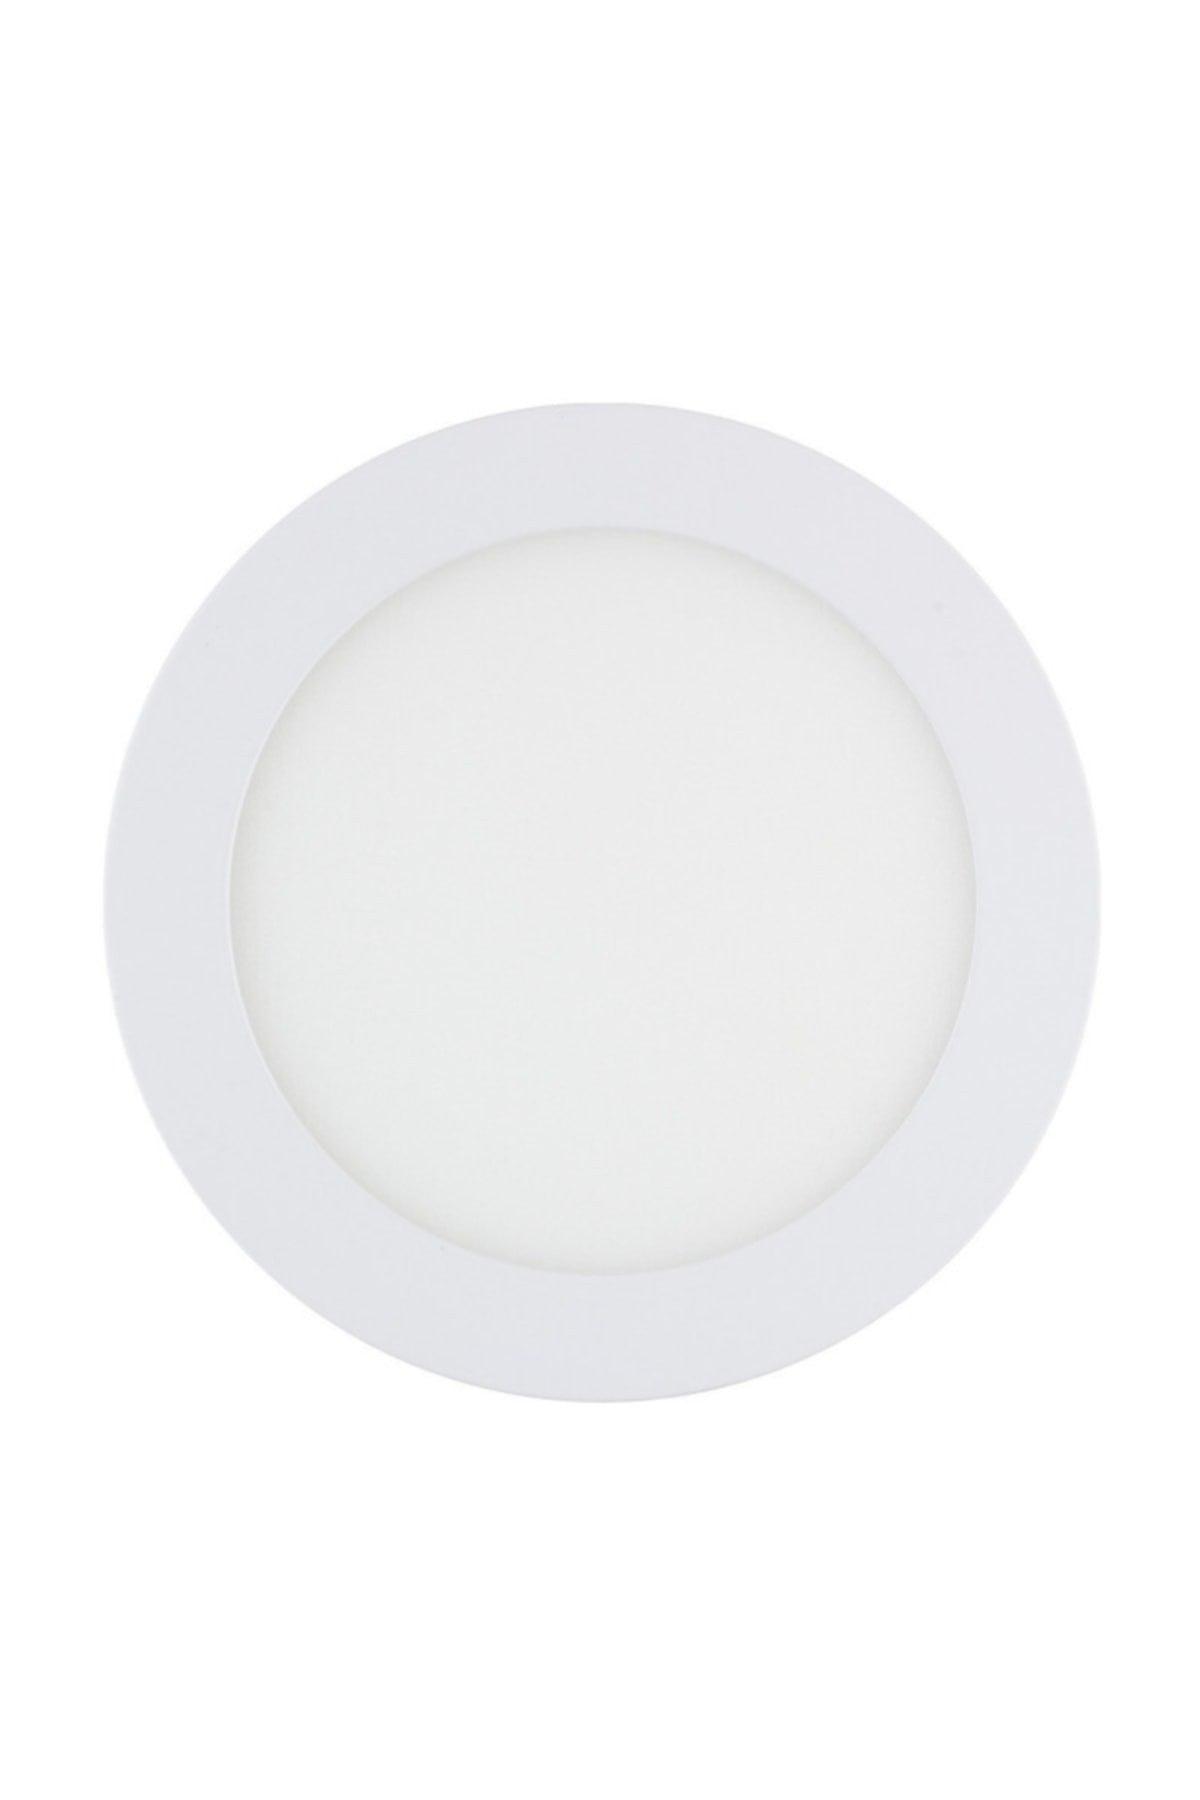 12w Recessed Led Panel Deluxe Daylight (5pcs)